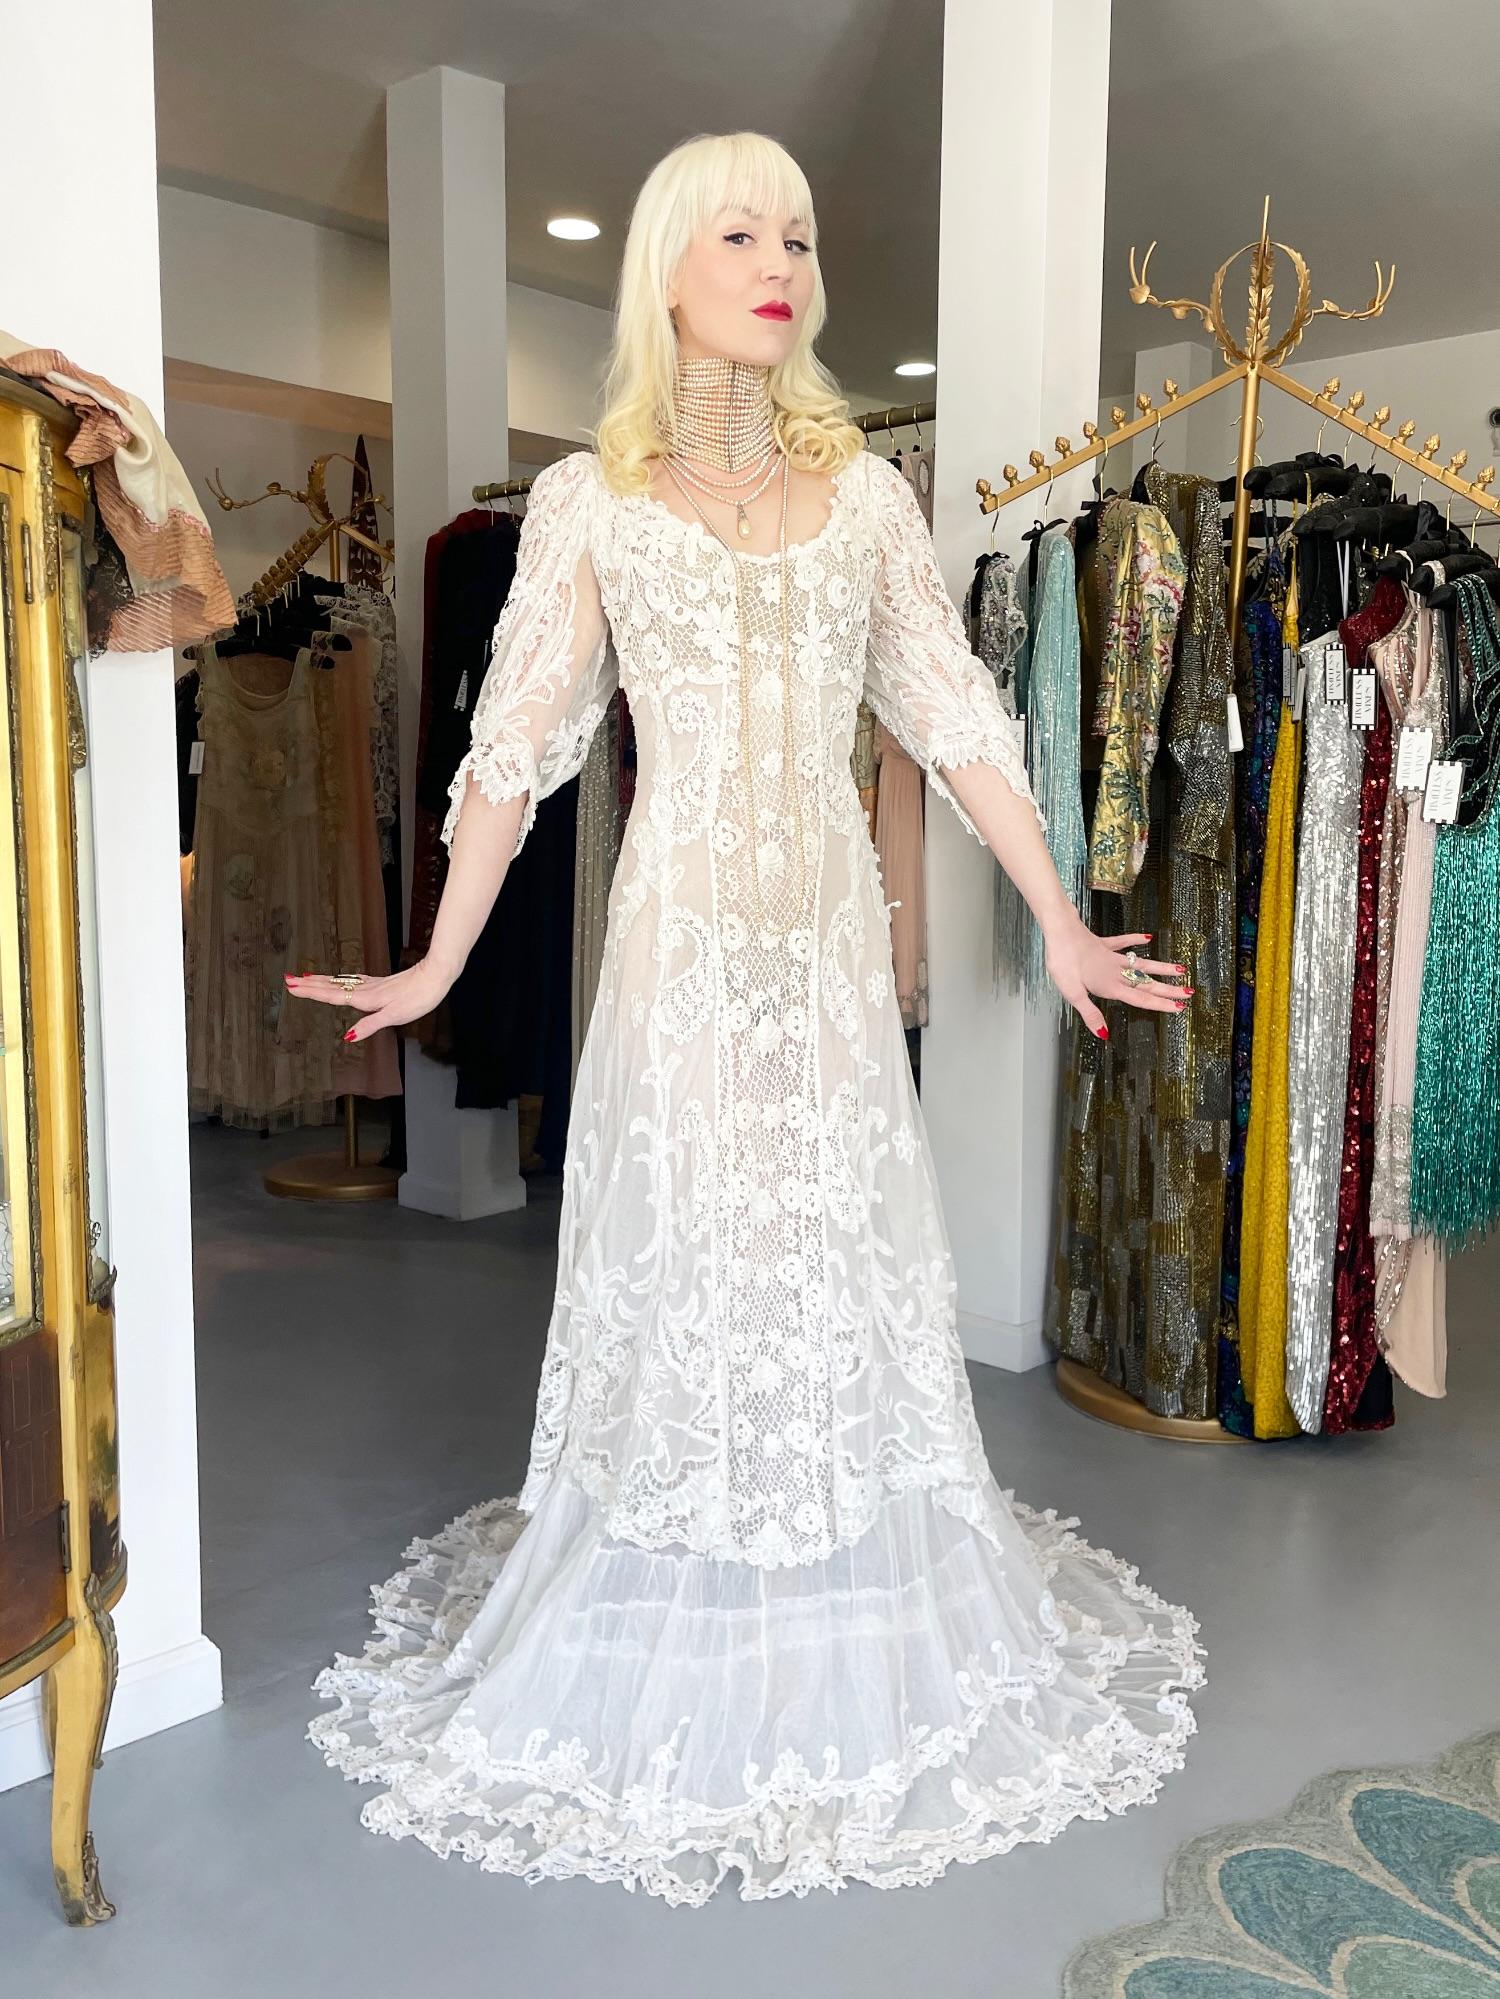 An exceptional ivory white handmade Irish crochet lace and sheer net trained bridal gown from the ethereal Edwardian era. This one-of-a-kind beauty is well over 100 years old but she reads so fresh. This garment represents weeks of custom couture